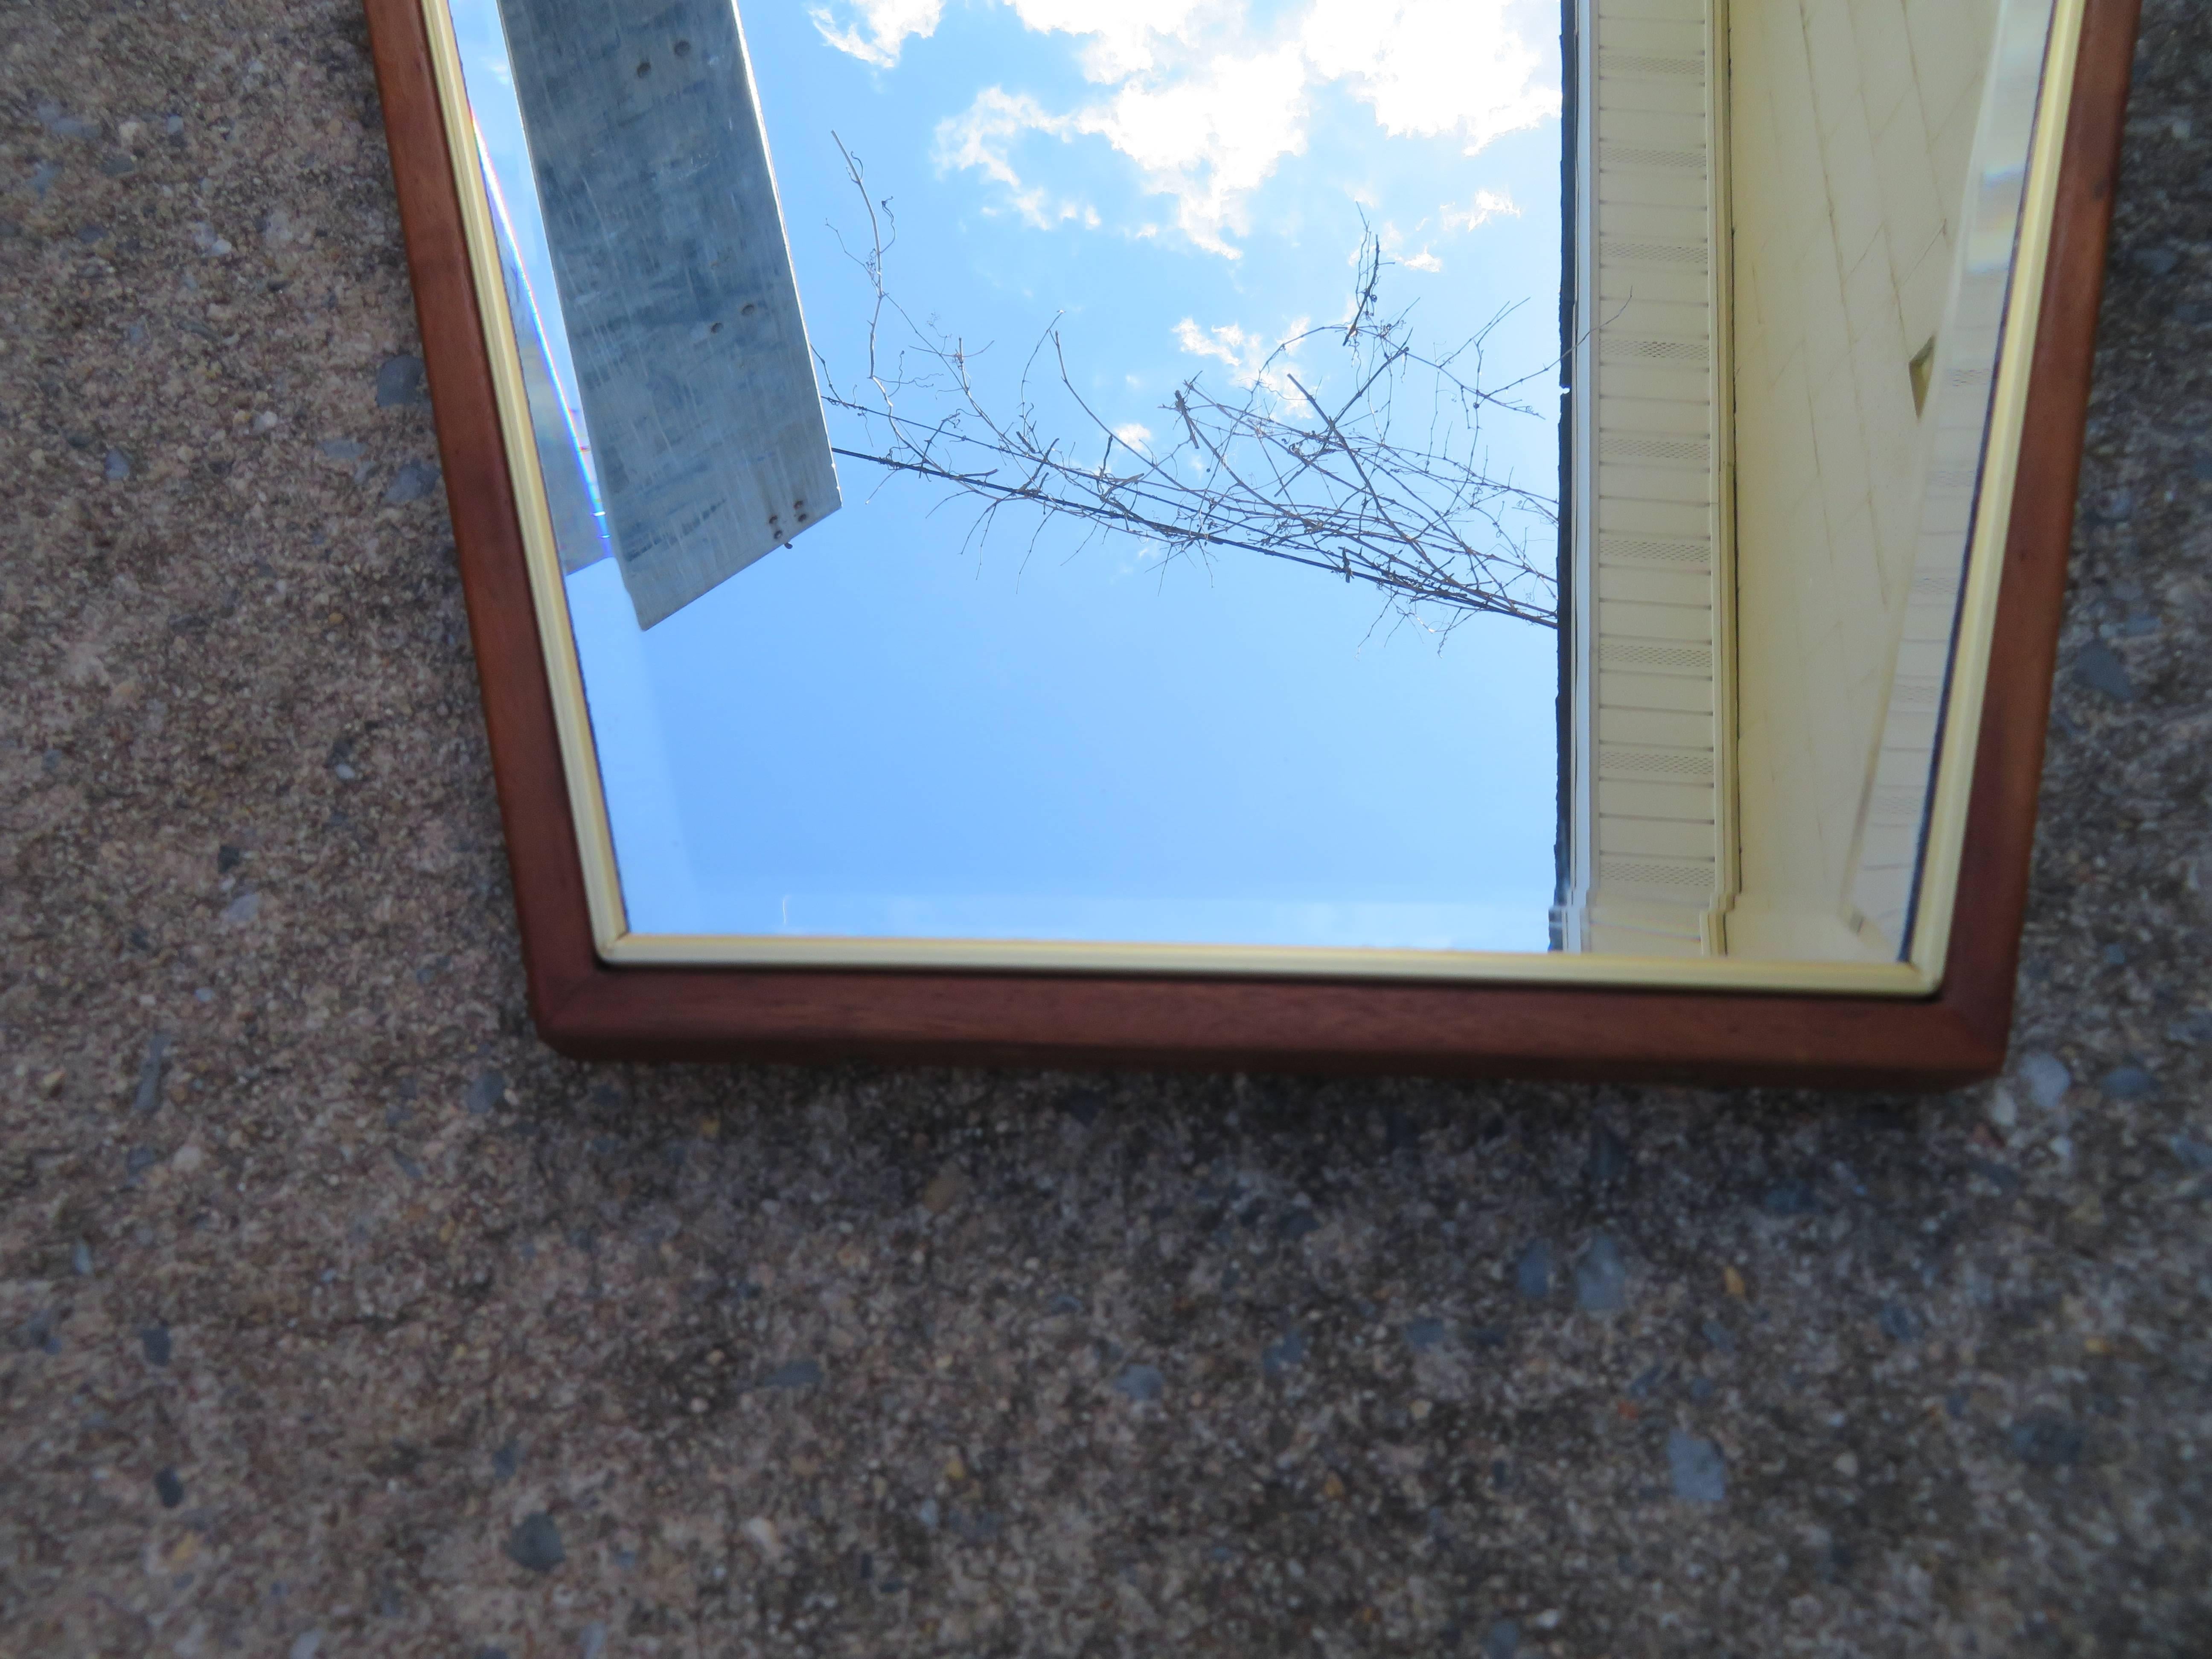 Lovely Mid-Century Modern diamond shaped walnut framed mirror. Well crafted and stylish this mirror is just fabulous in person. It measures 49.5